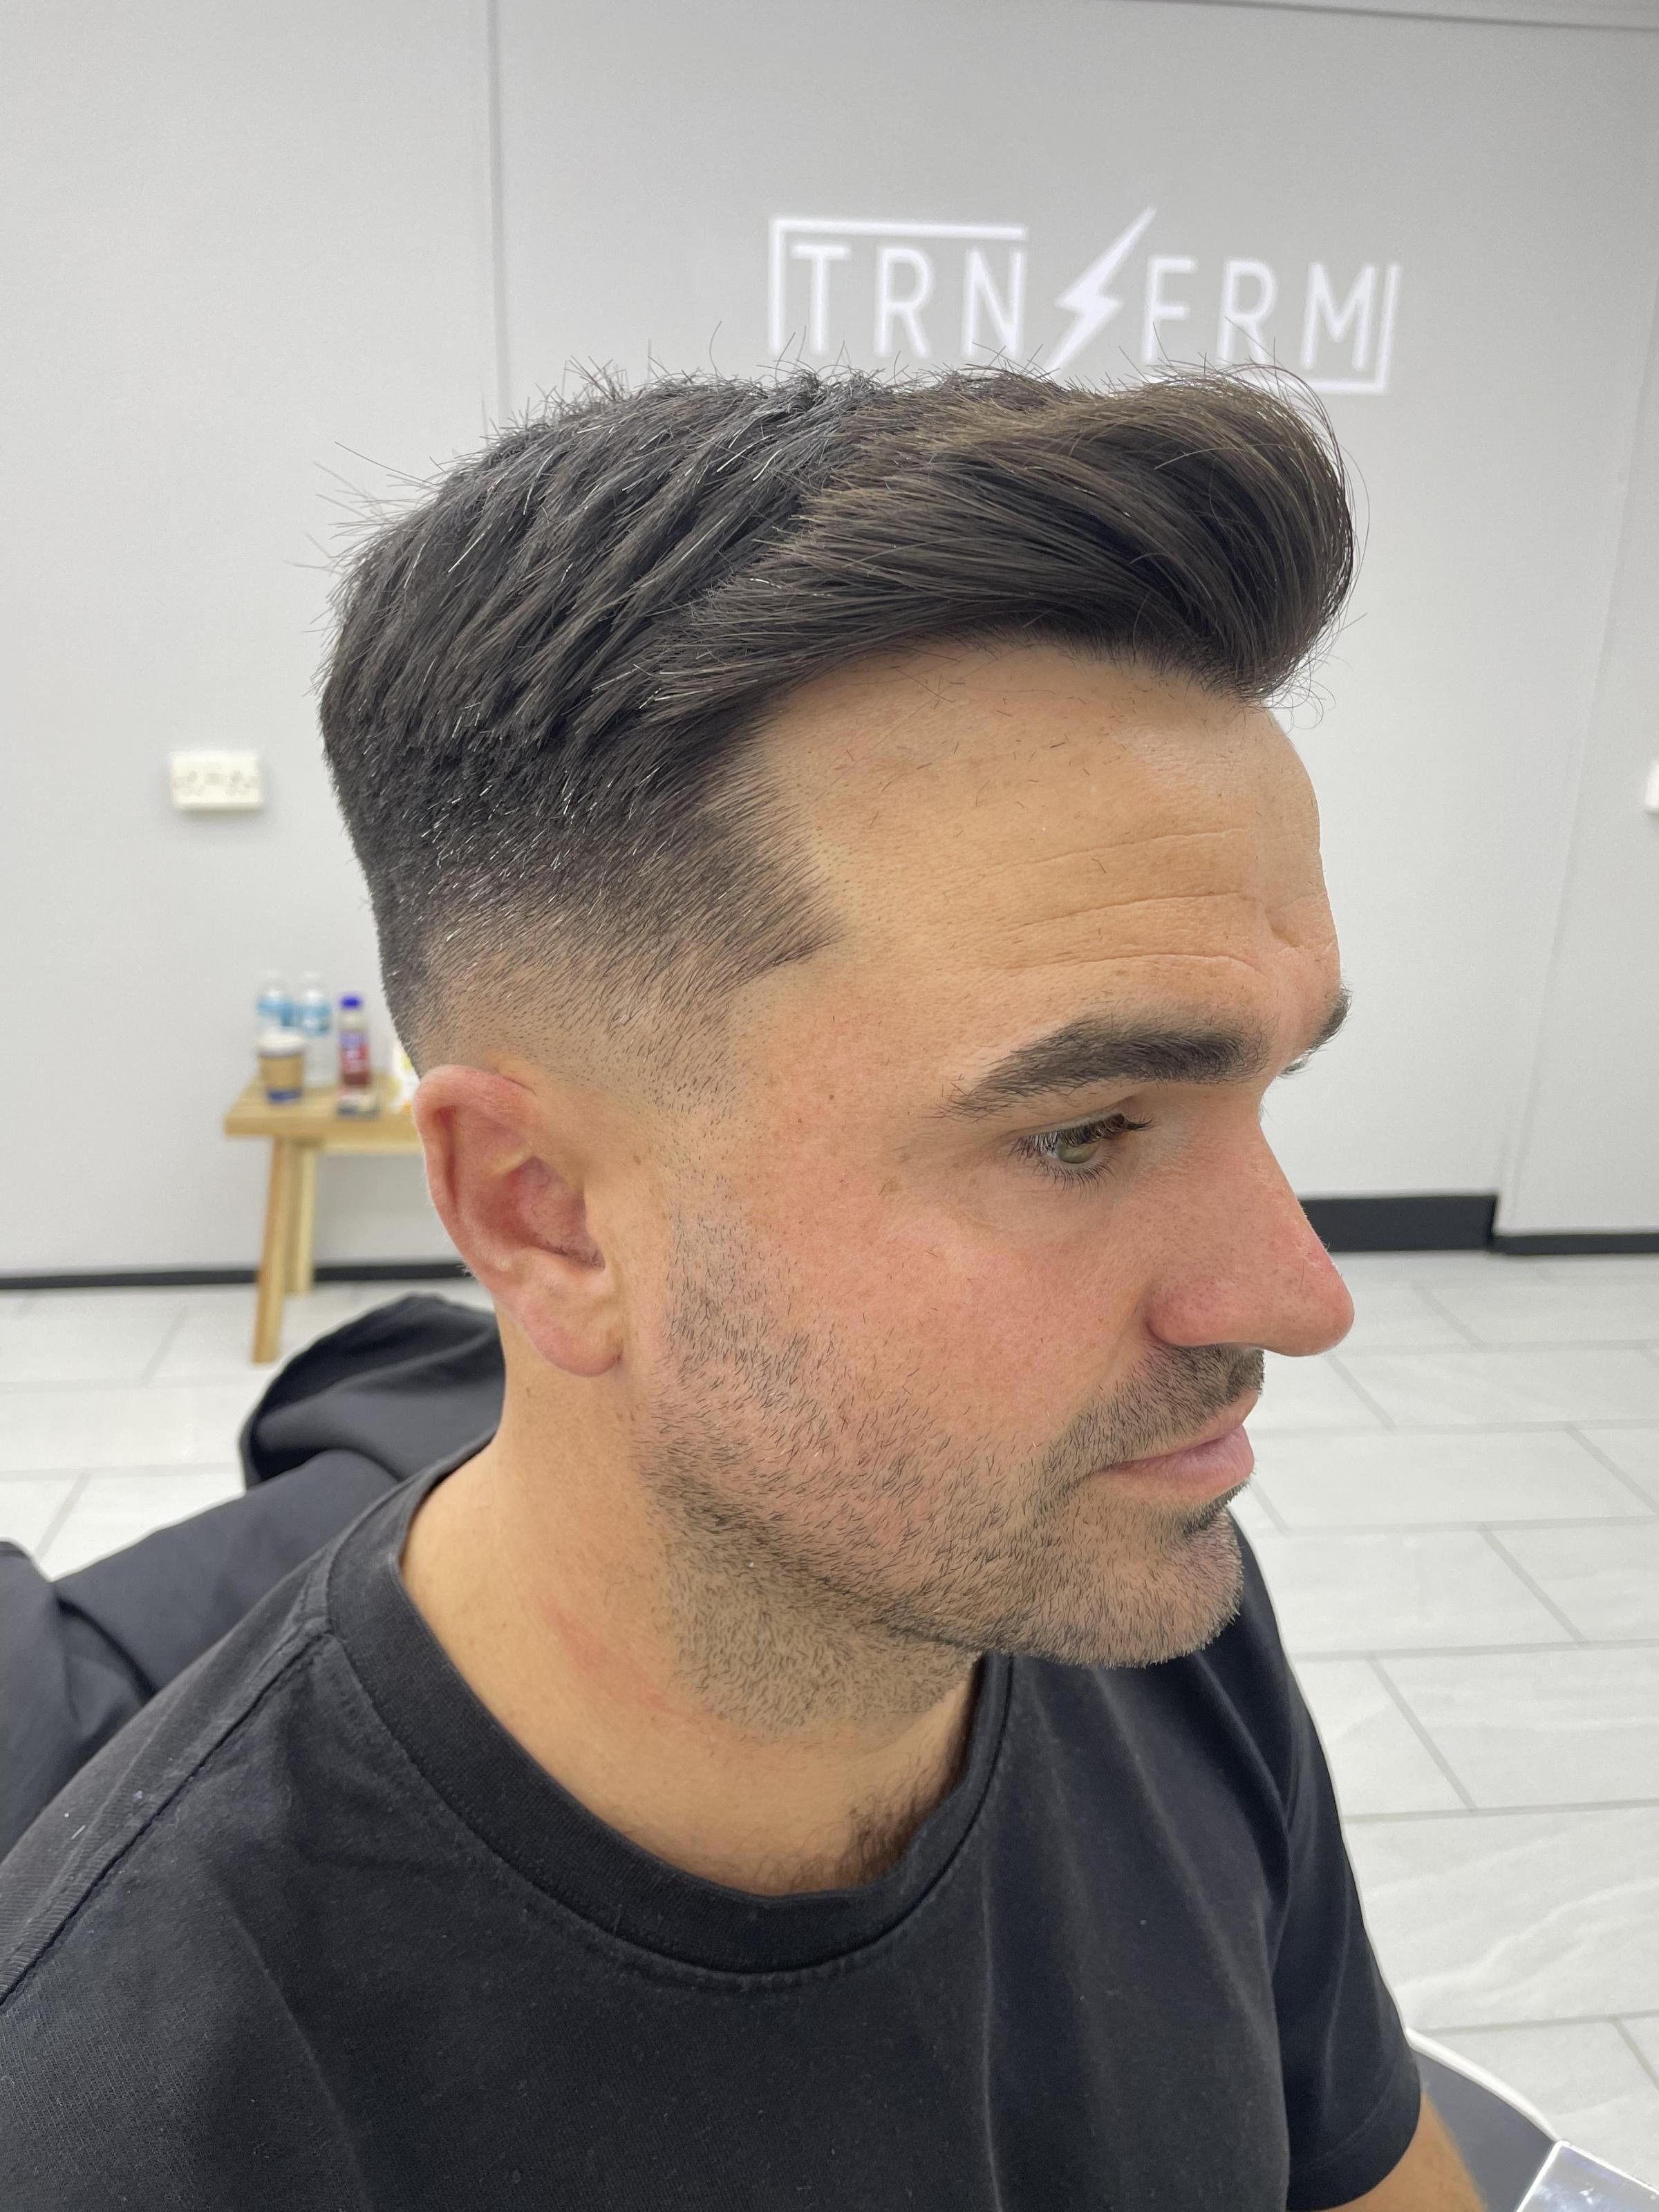 Skin fade with modern style quiff, done by Jev.